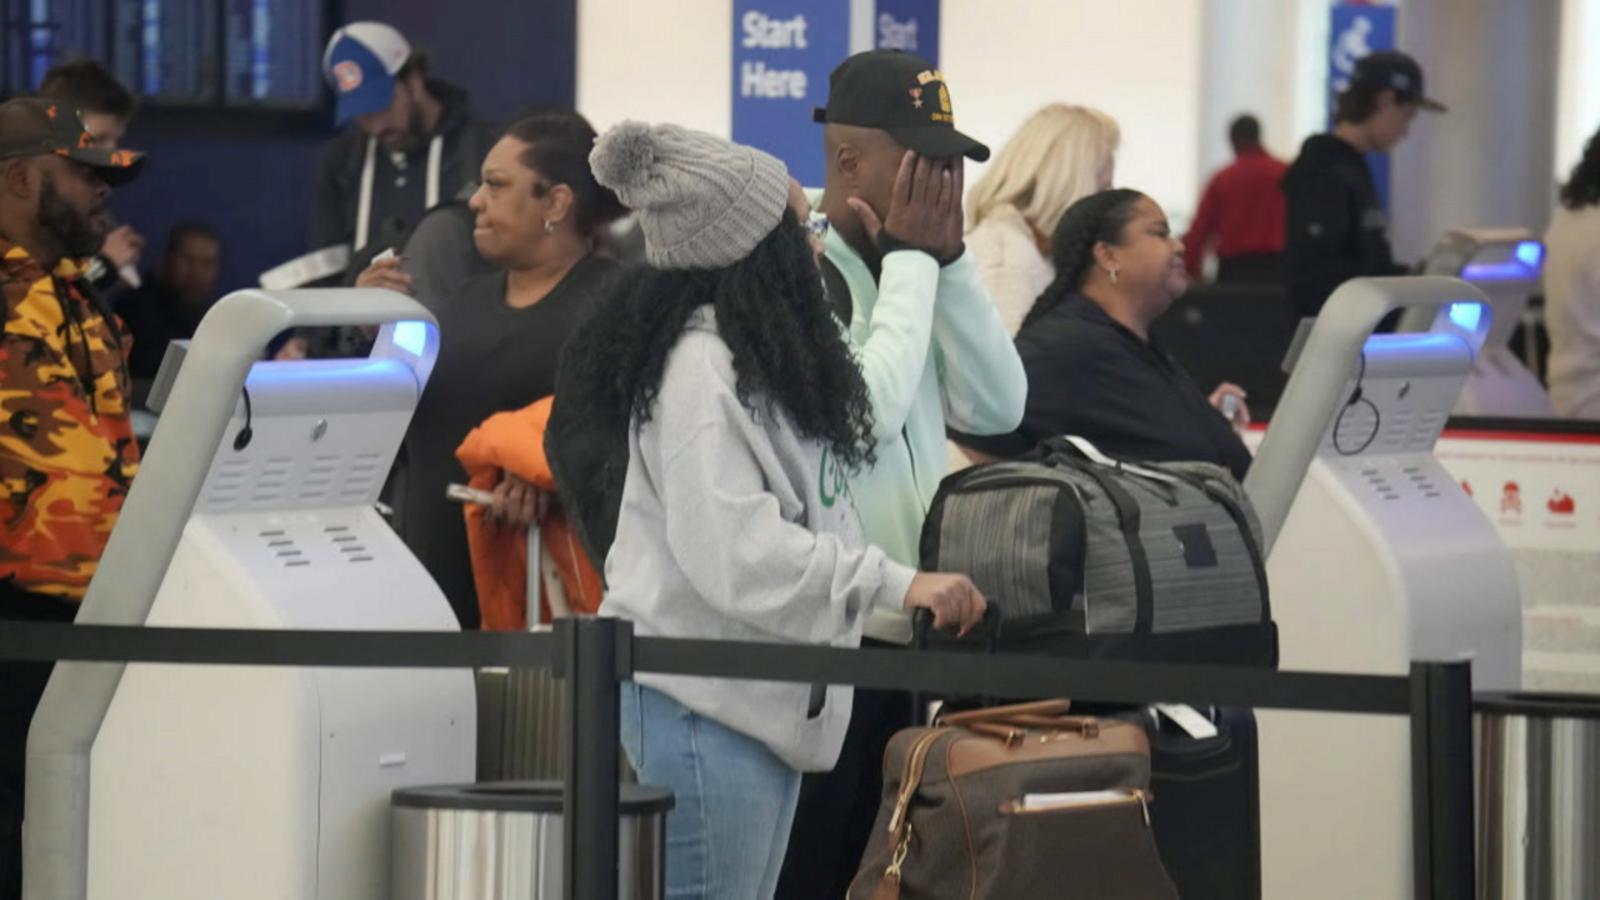 VIDEO: Millions expected to fly home after Thanksgiving weekend